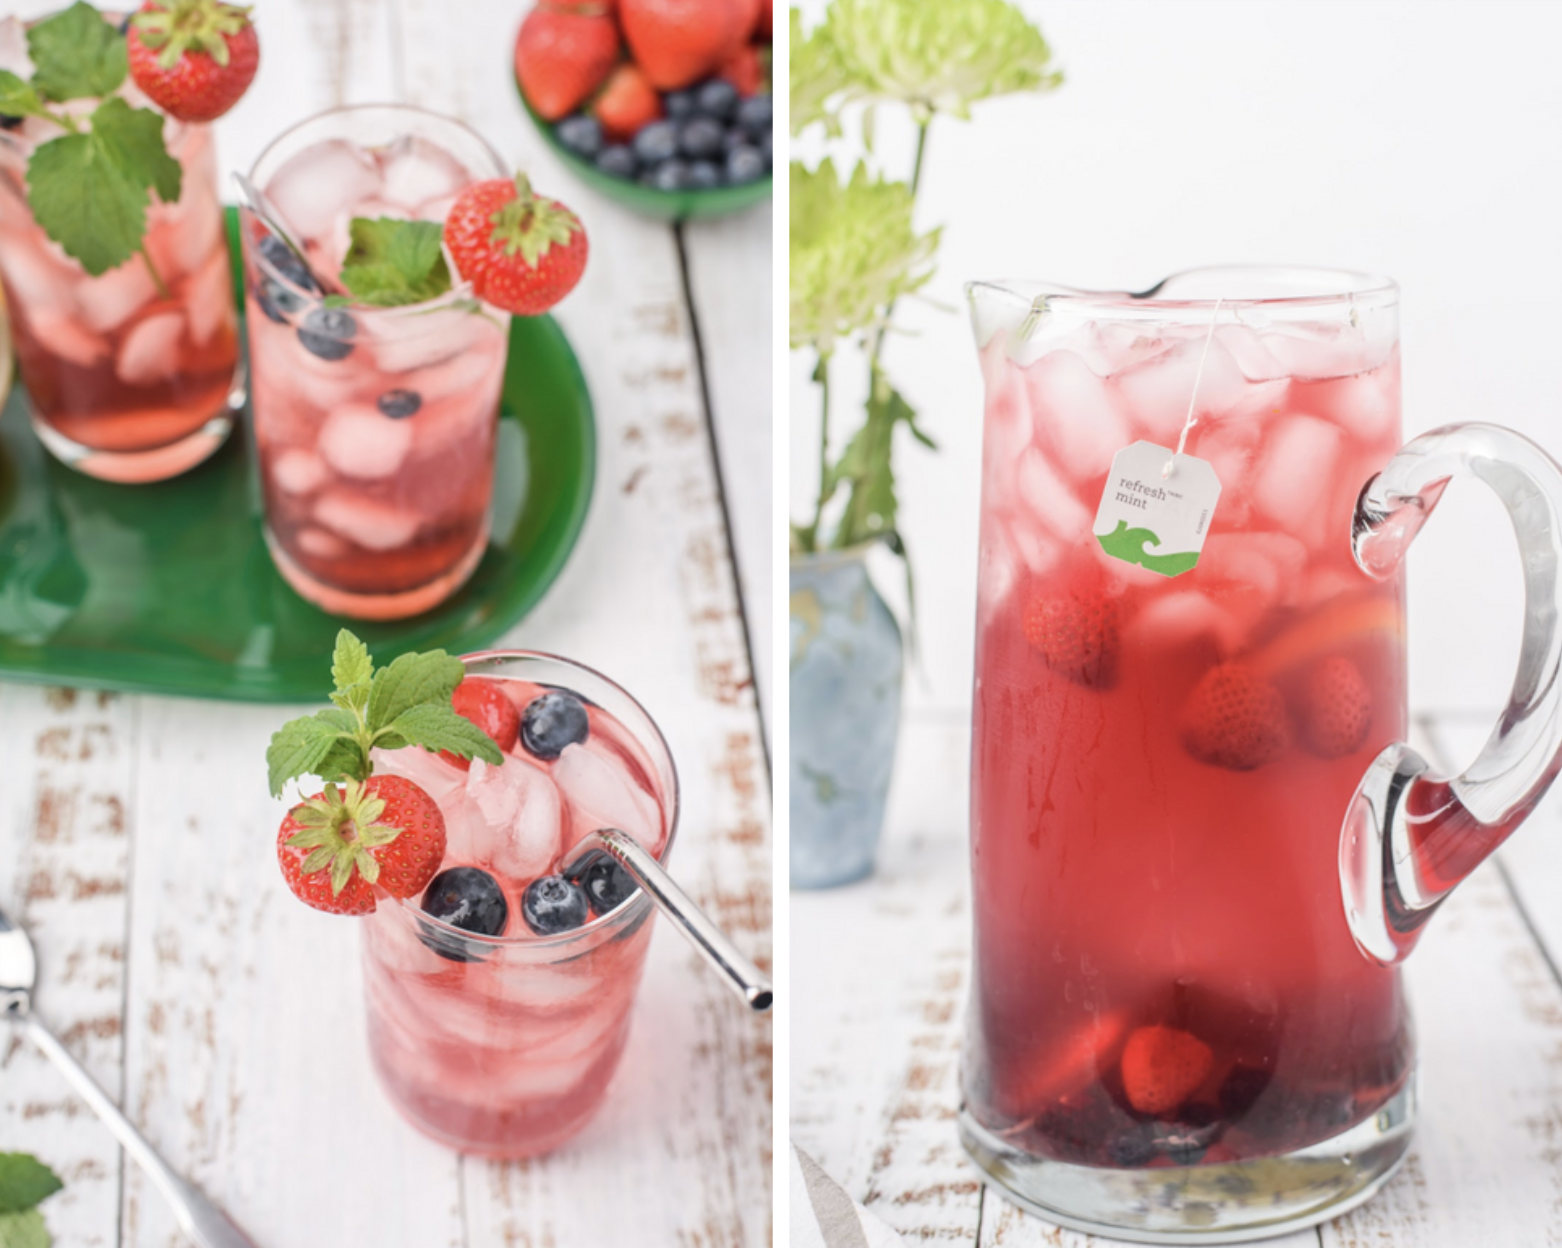 This tasty, refreshing and easy to make ginger mint berry iced tea is perfect for your next family barbecue or any get together this summer! #icedtea #summerdrink #berries #minttea #berrydrink #mintberry #strawberries #foodies #foodblogger #yummy